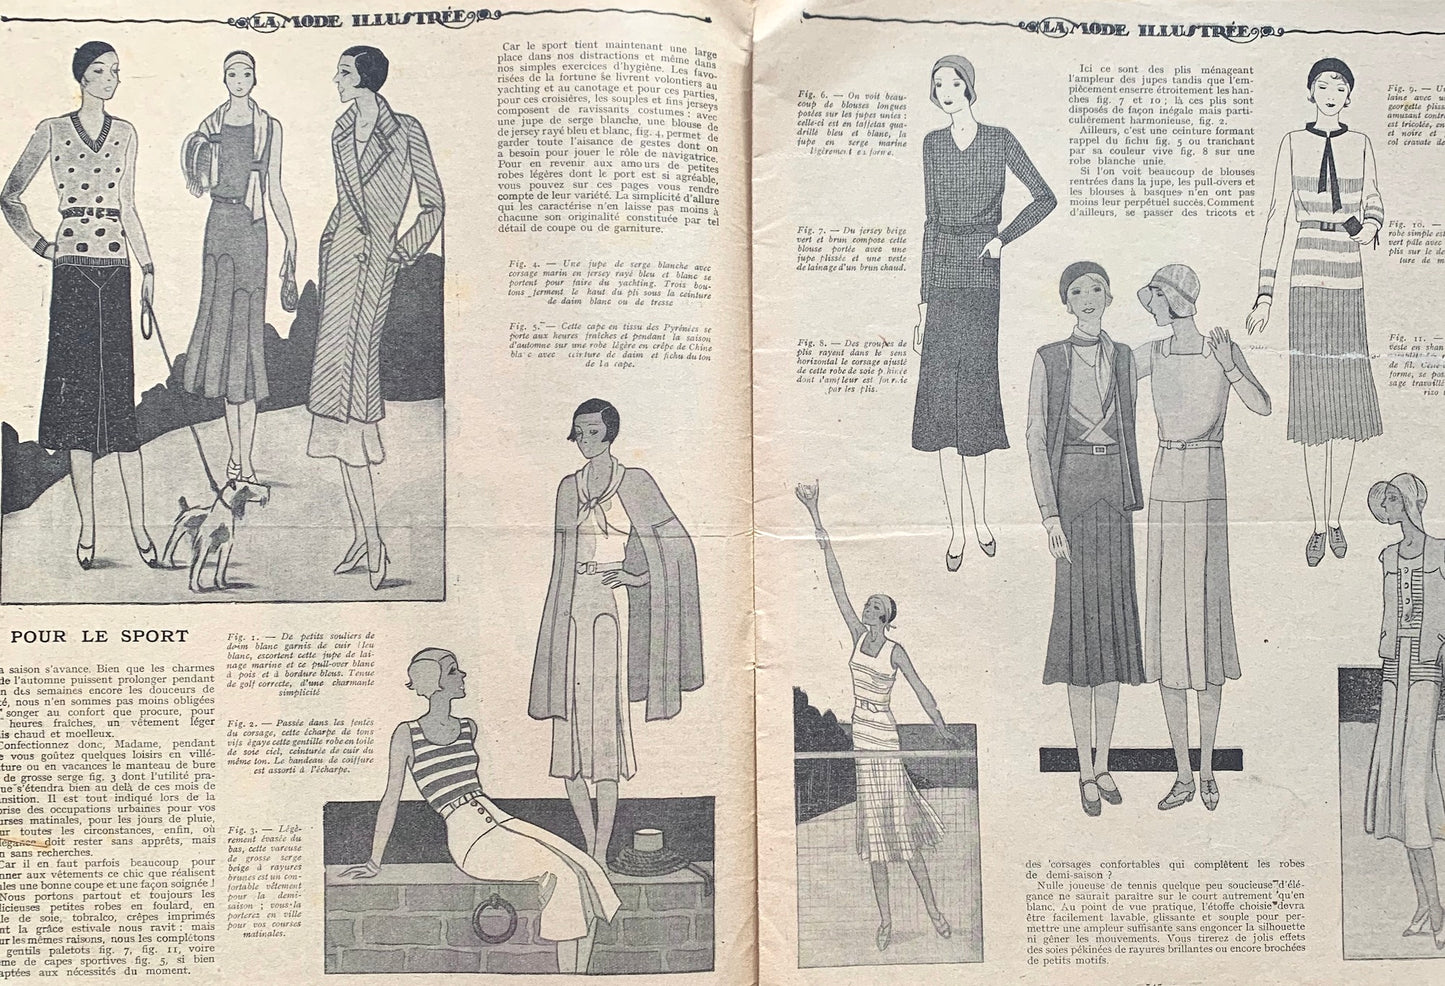 Women and Childrens Fashions in August 1930 French Fashion Paper La Mode Illustree